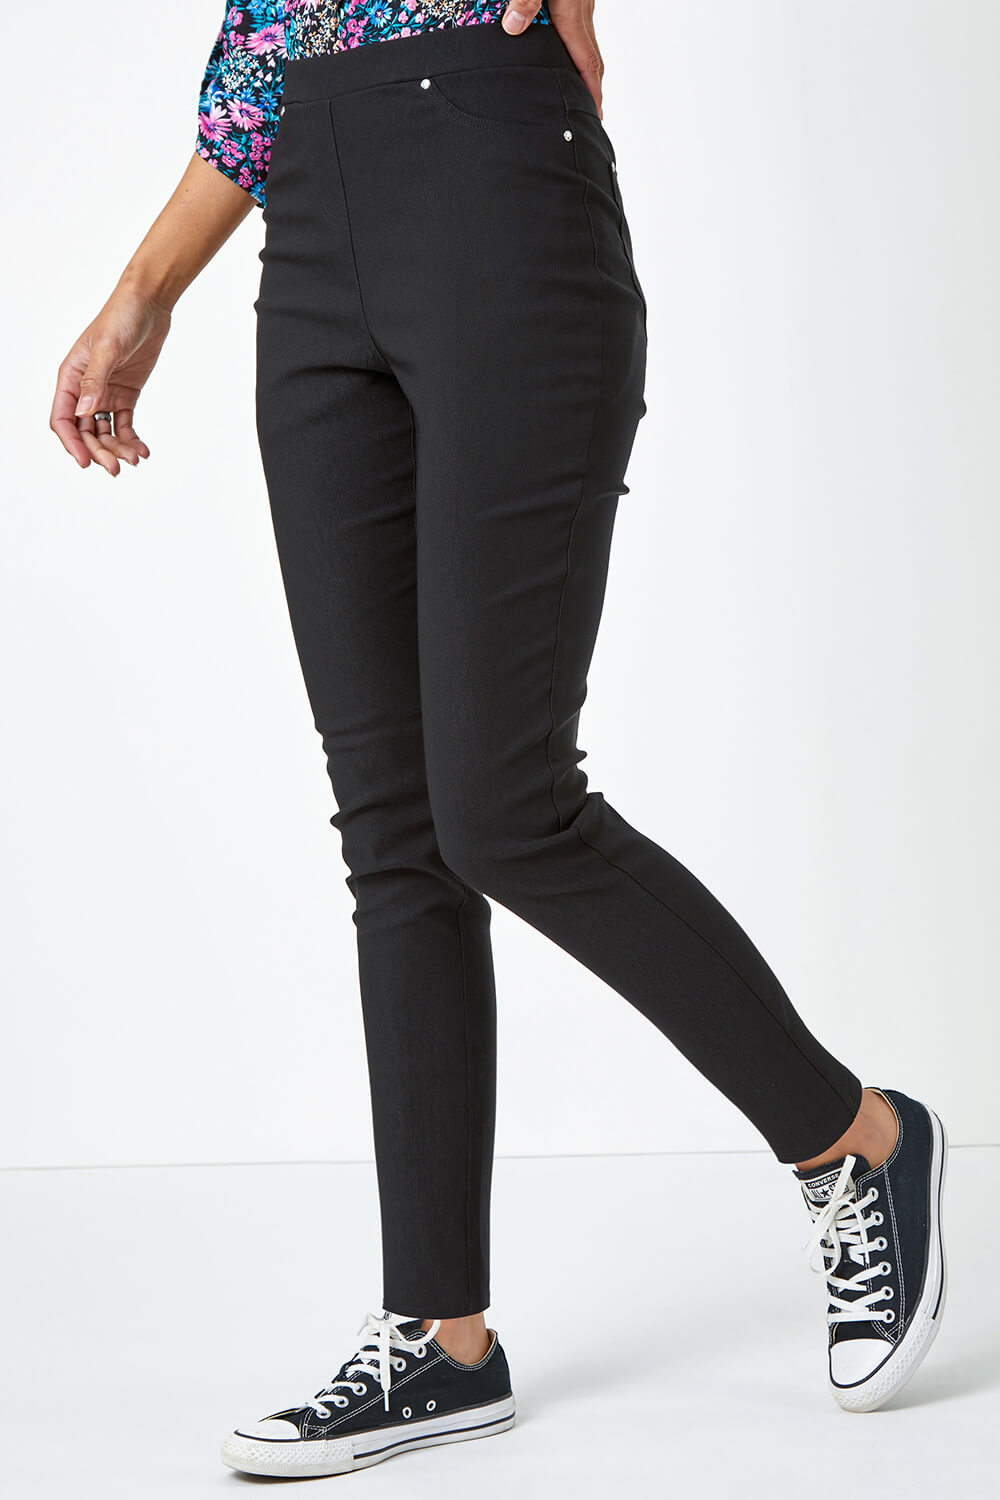 Black Stretch Jean Trouser, Image 4 of 5